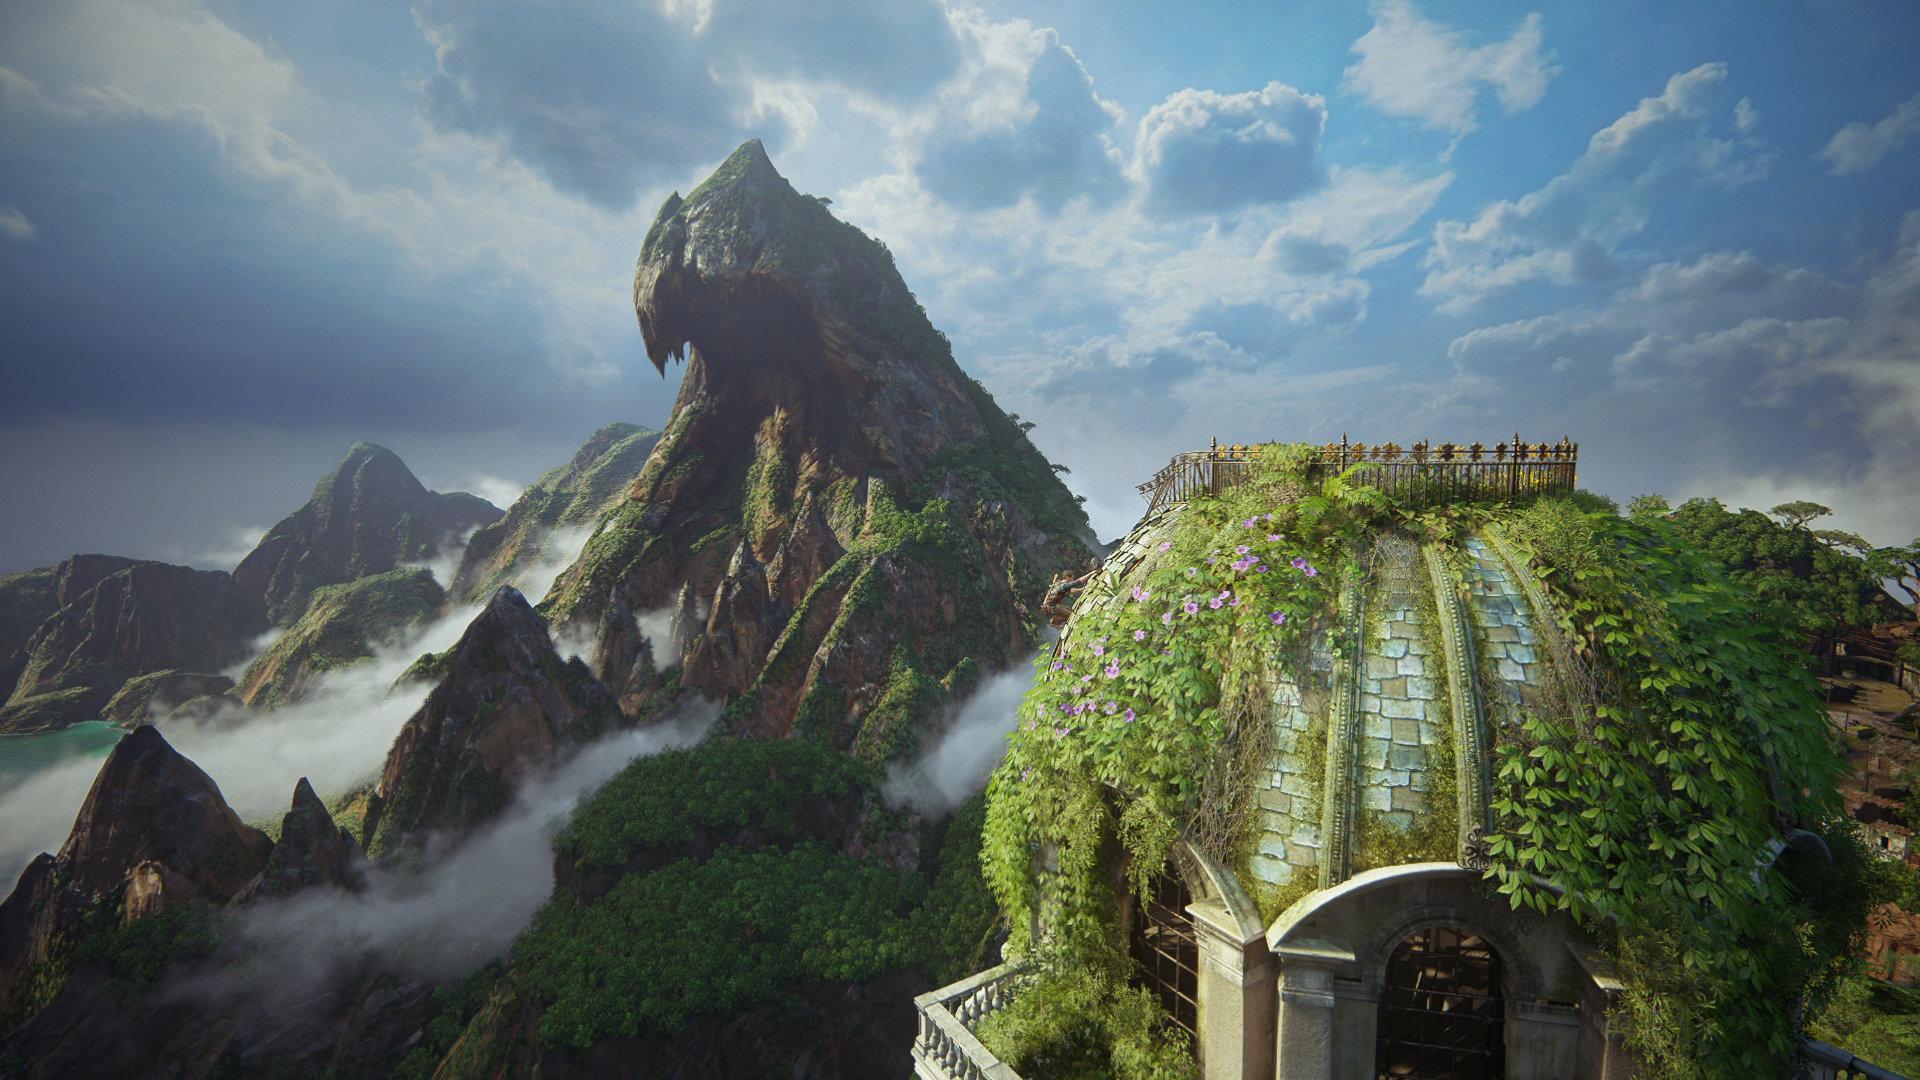 General 1920x1080 Uncharted 4: A Thief's End Nathan Drake video games Uncharted Naughty Dog video game art screen shot sky clouds leaves mountains nature digital art